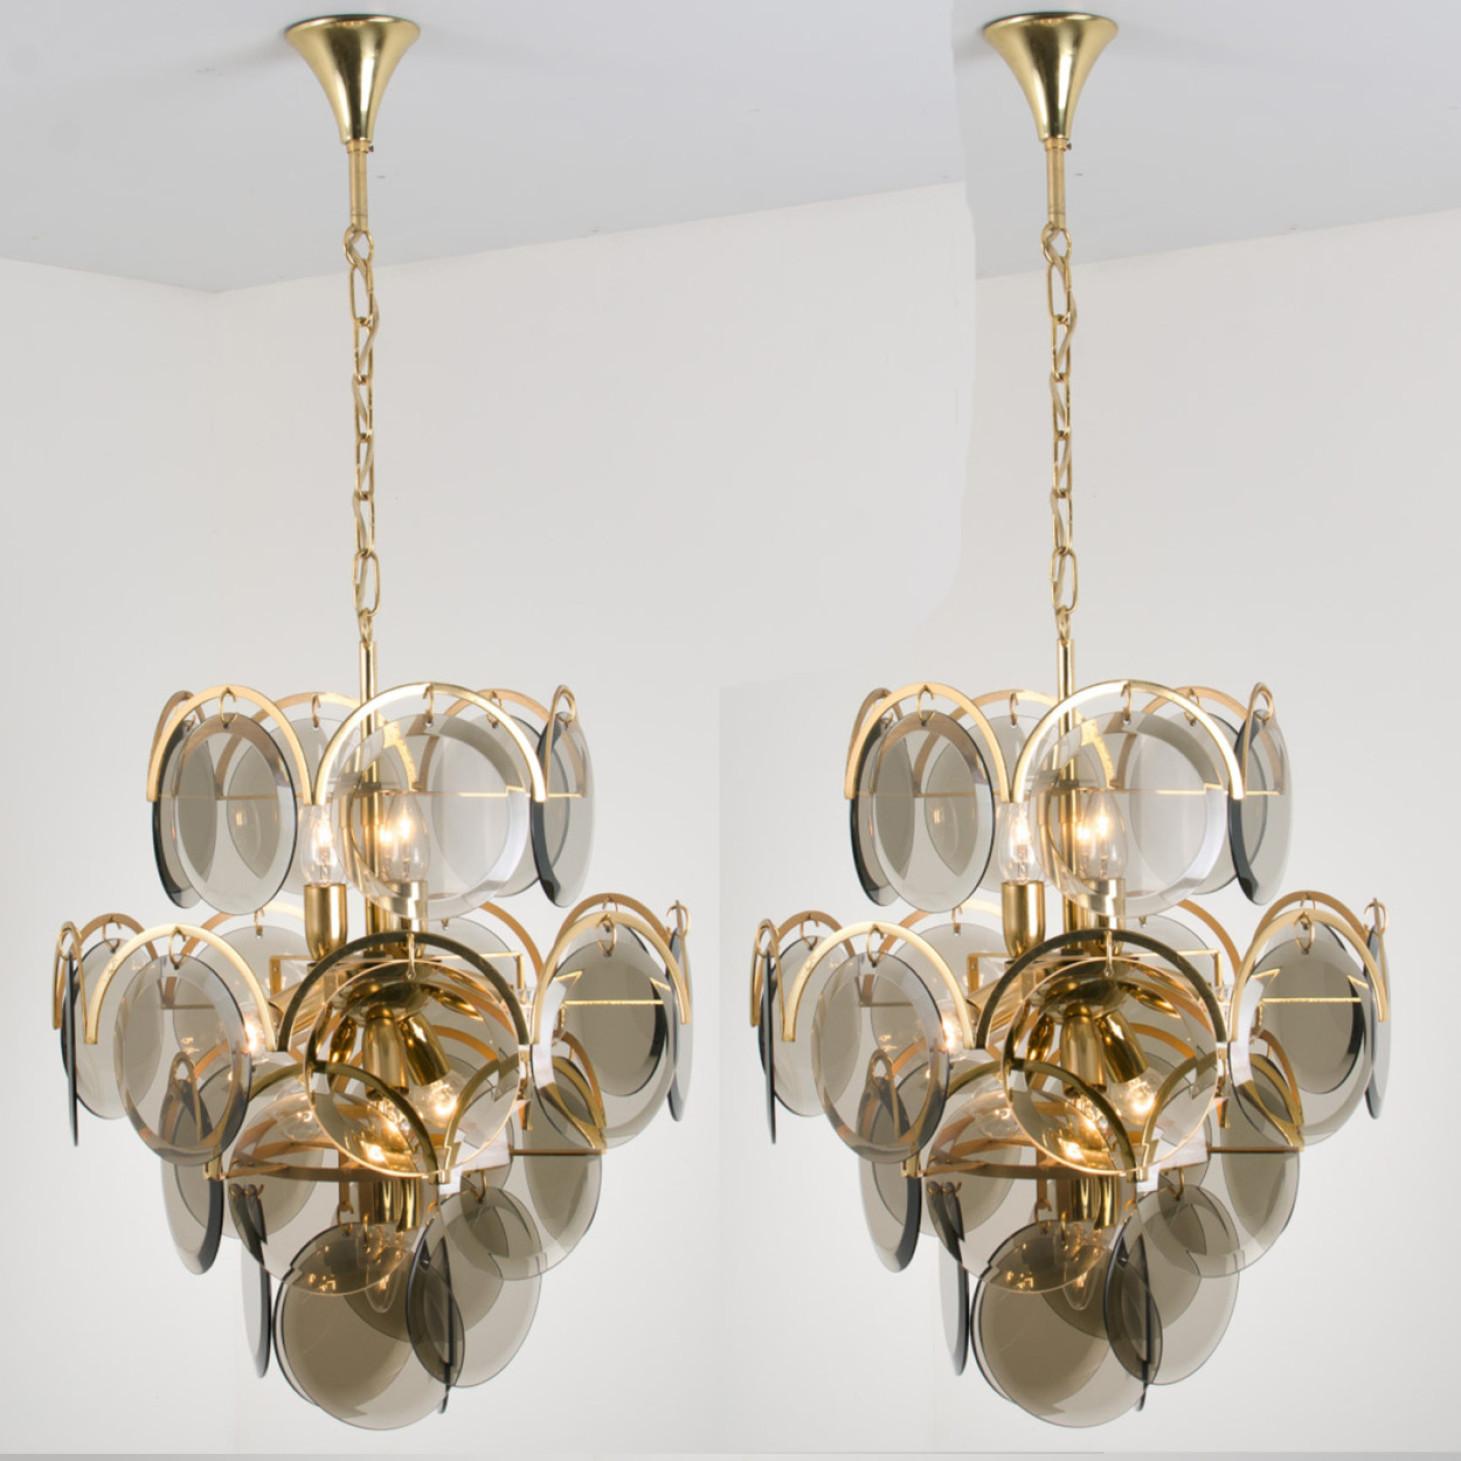 Pair of  gorgeous five tiers hanging light fixtures, in style of Vistosi. With graduated tiers of smoked round facet shaped glass discs framed by half-moon shaped brass. The chandeliers are complete, no hook or glass disk is missing with its